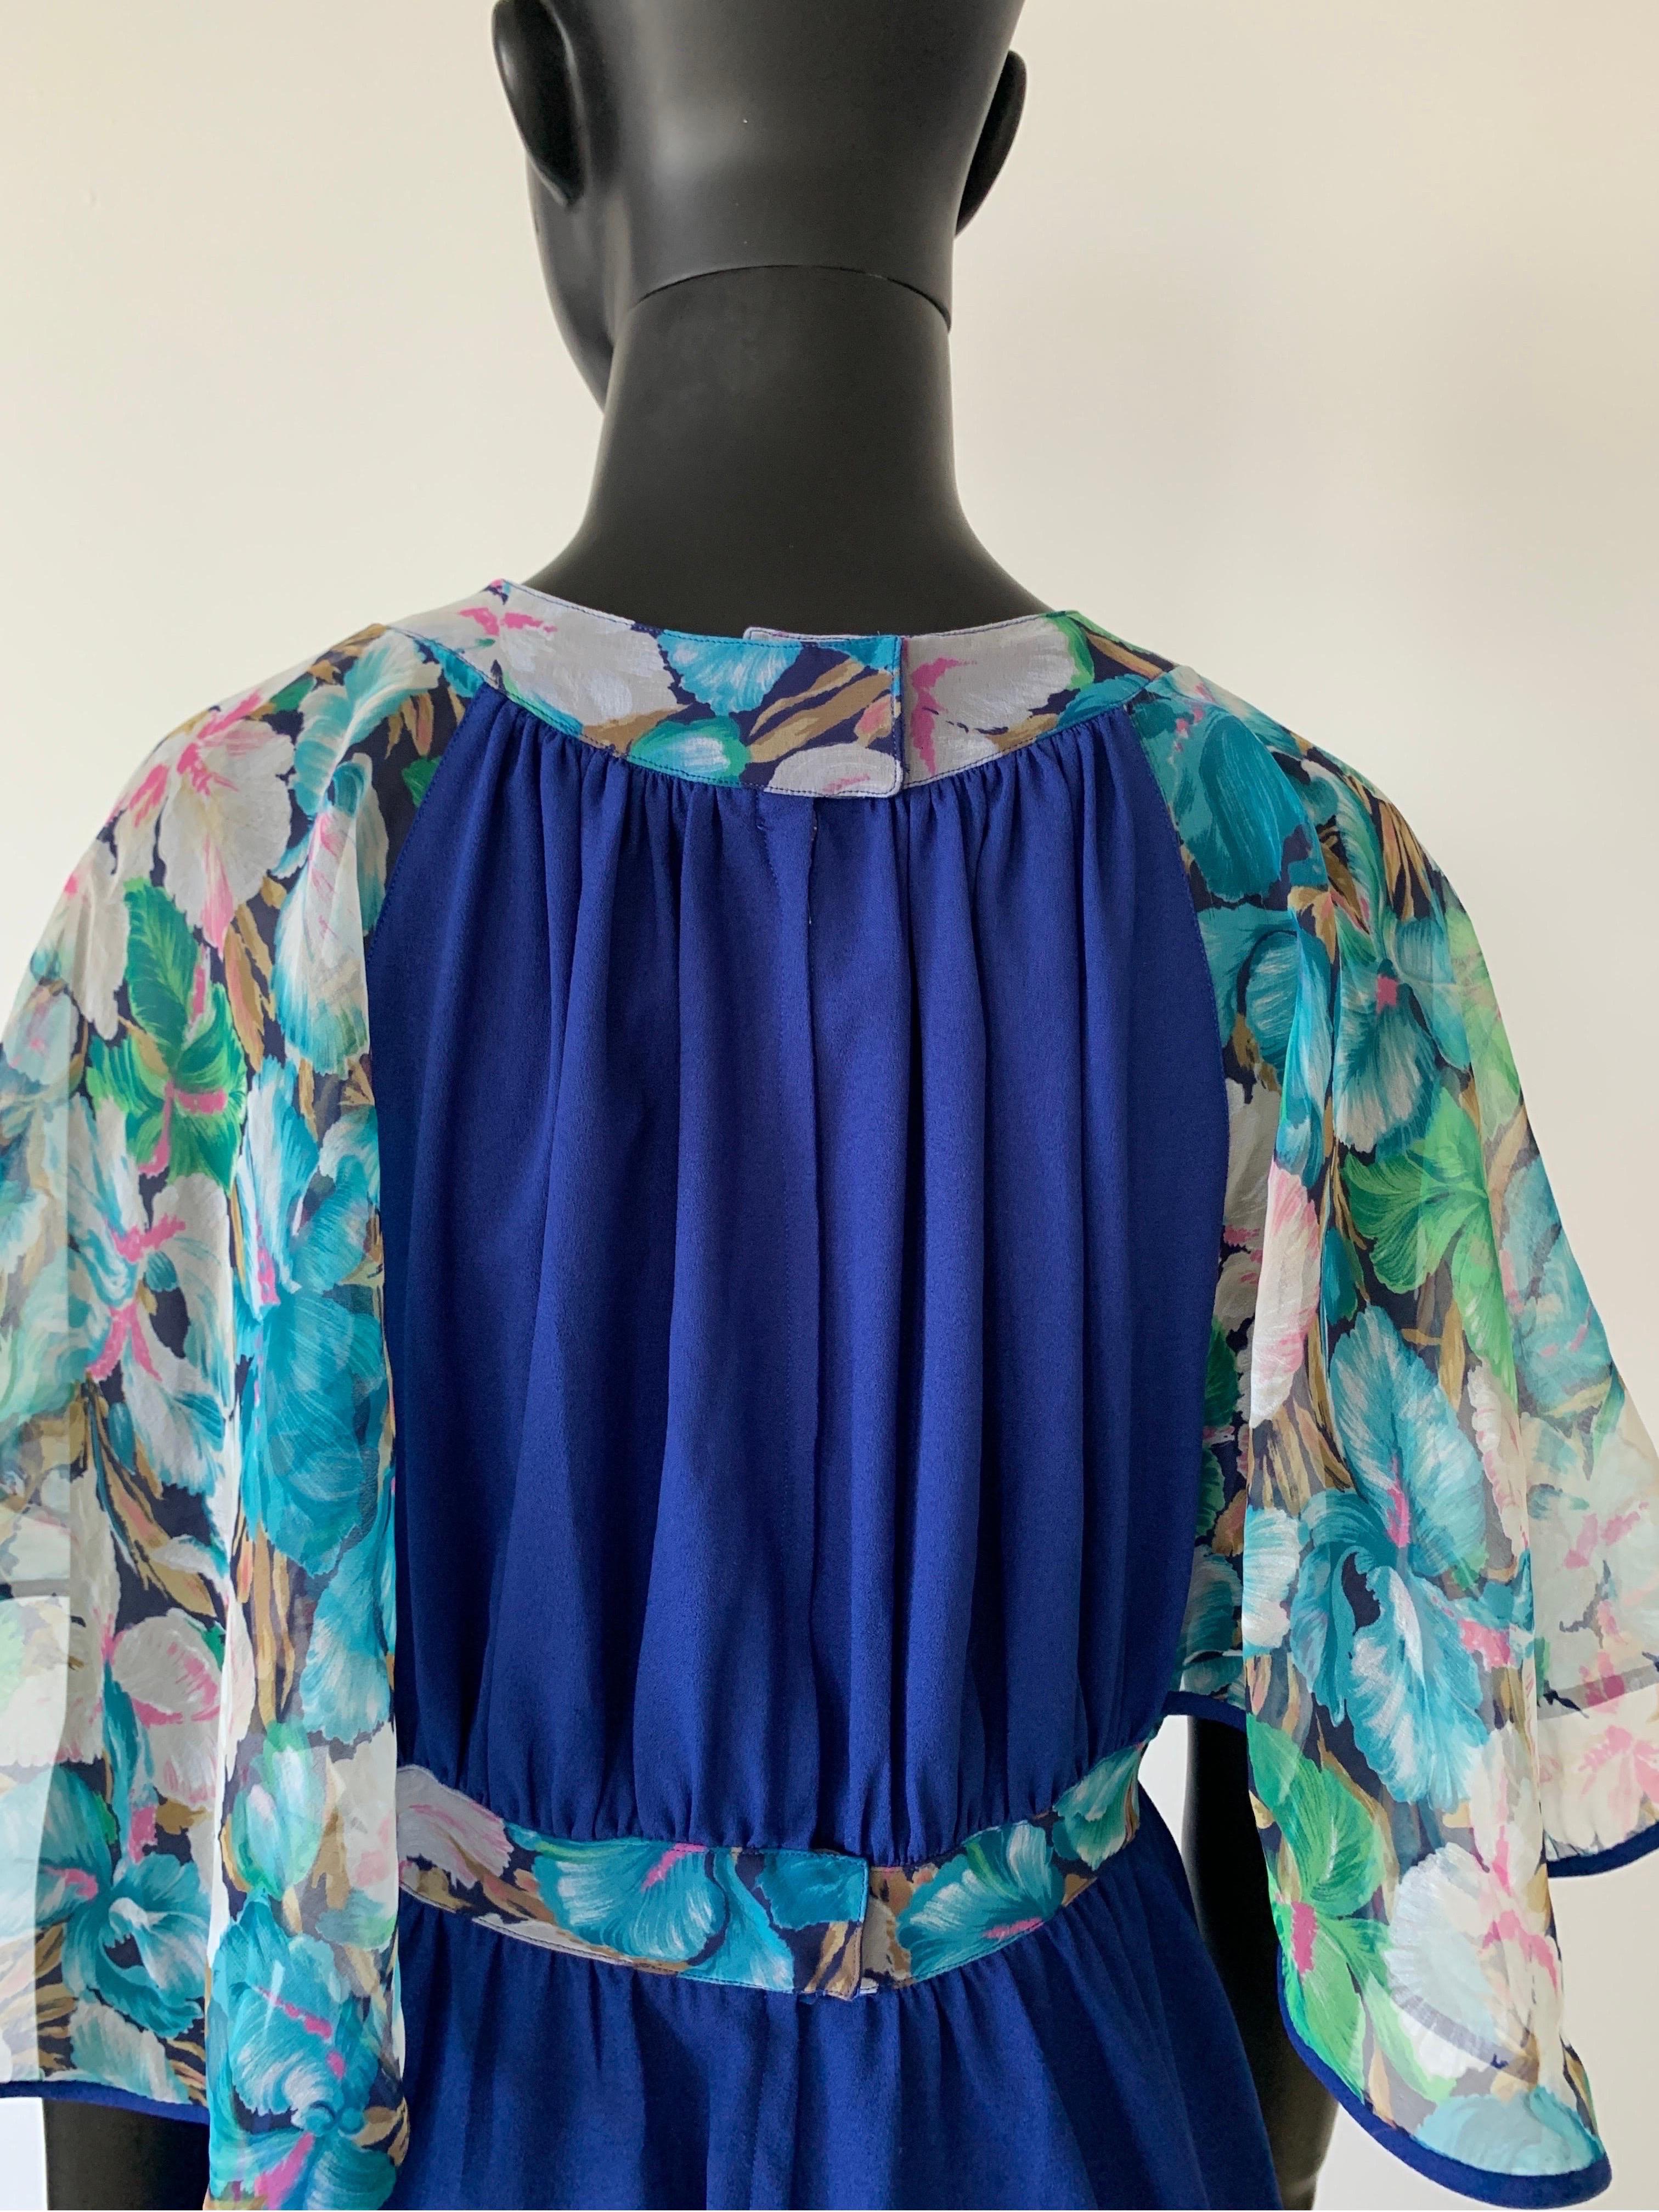 A super 1970’s vintage long dress in fantastic cobalt blue colour with chiffon floral Angel  sleeves and waist detail. 

The perfect spring/summer dress for that garden party or a fun dress for a resort.

A great example of this era of fashion.

In